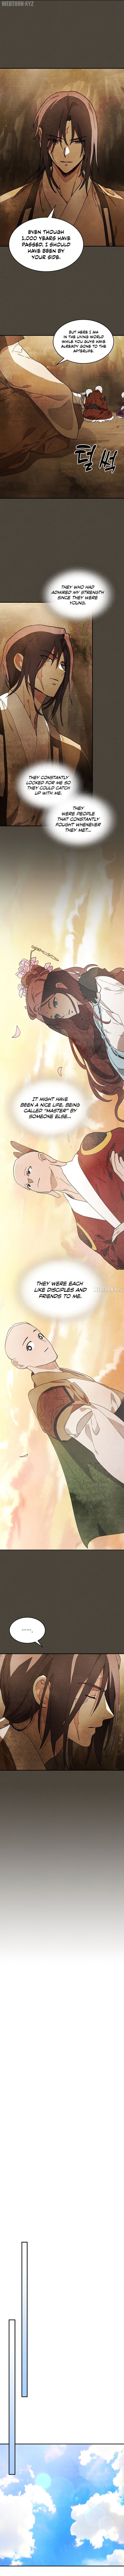 chronicles-of-the-martial-gods-return-chap-38-5